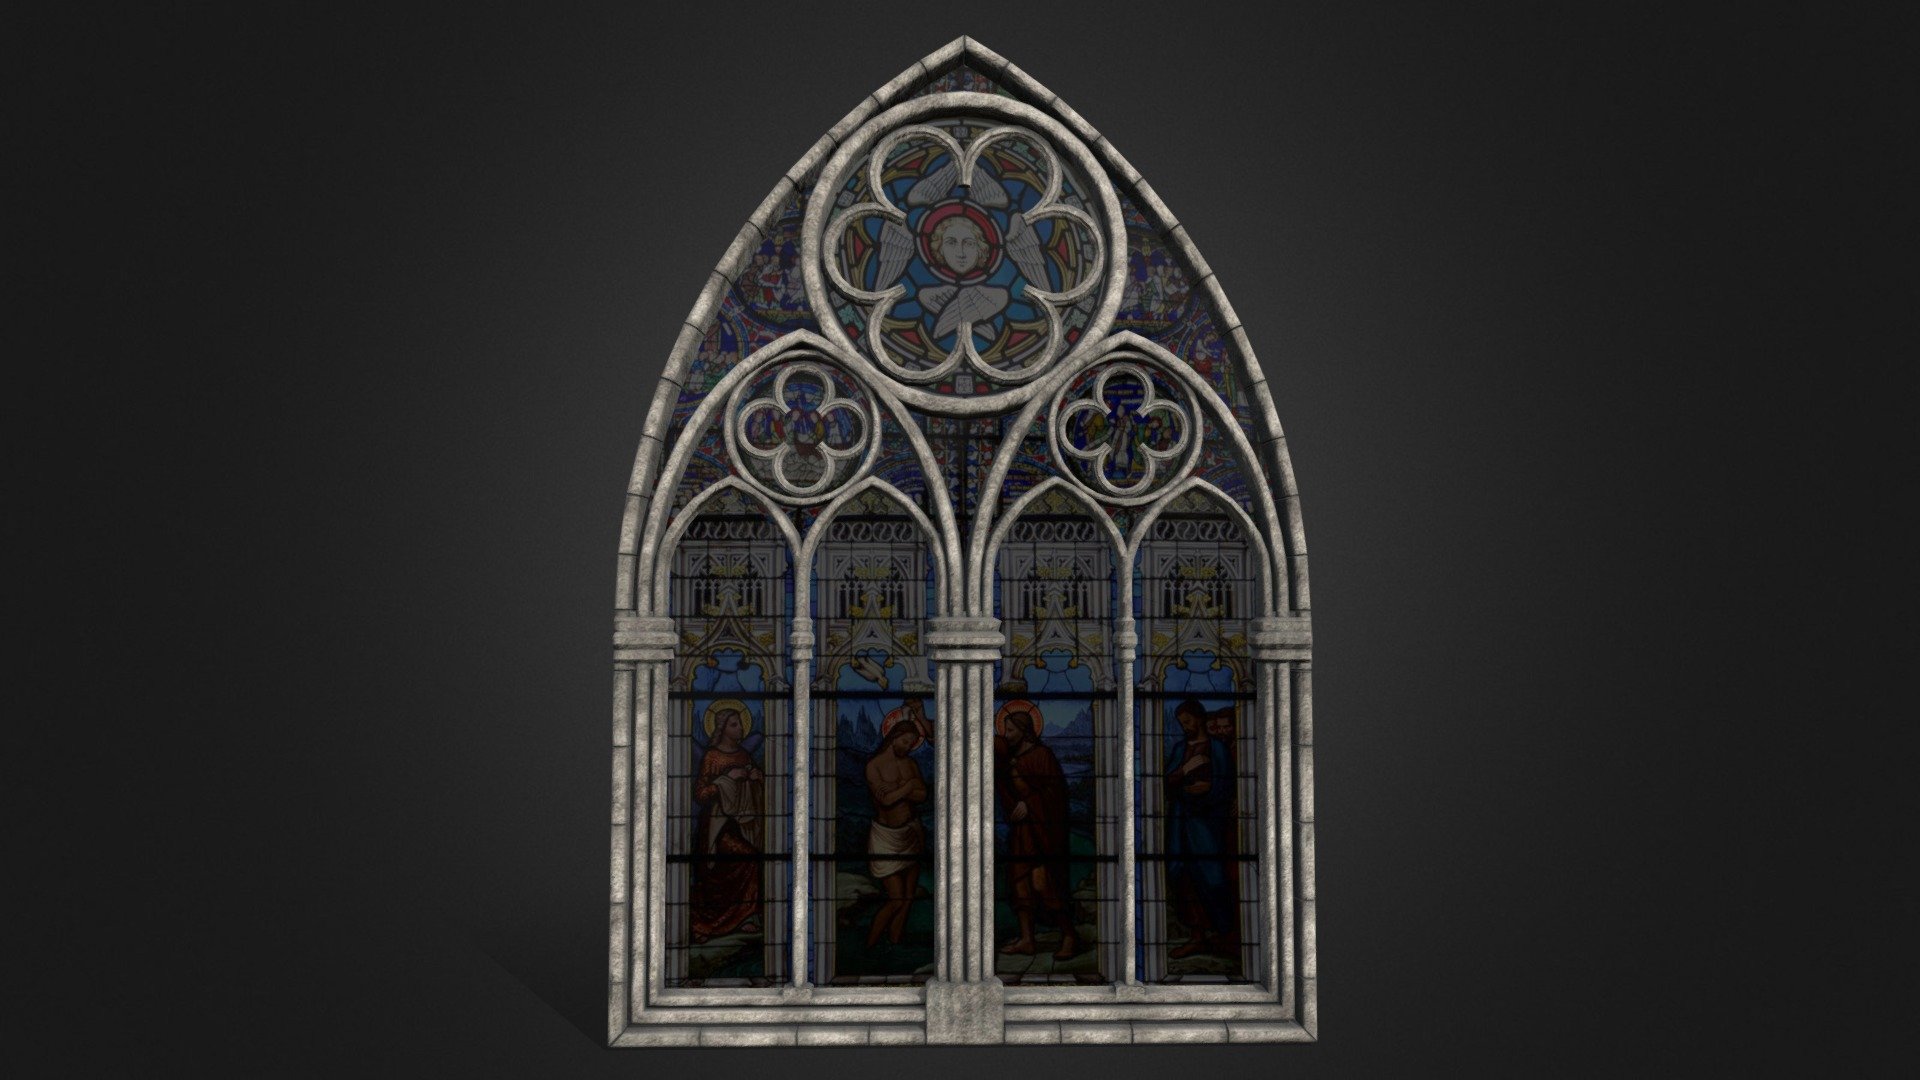 A big gothic window with stained/painted glass.
The emision for the glass is set a little high so you can see some of the subject. Of course, this is not realistic.   




Vertices: 6830

Edges: 13703

Face: 6857

Triangles: 13472

The Blender scene with the volumetric rendering for the examples shown here is included separately in the package. 
See this previews of a real volumetric rendering in Blender with this window (no composting fake). 



Feel free to check out my other free models 3d model